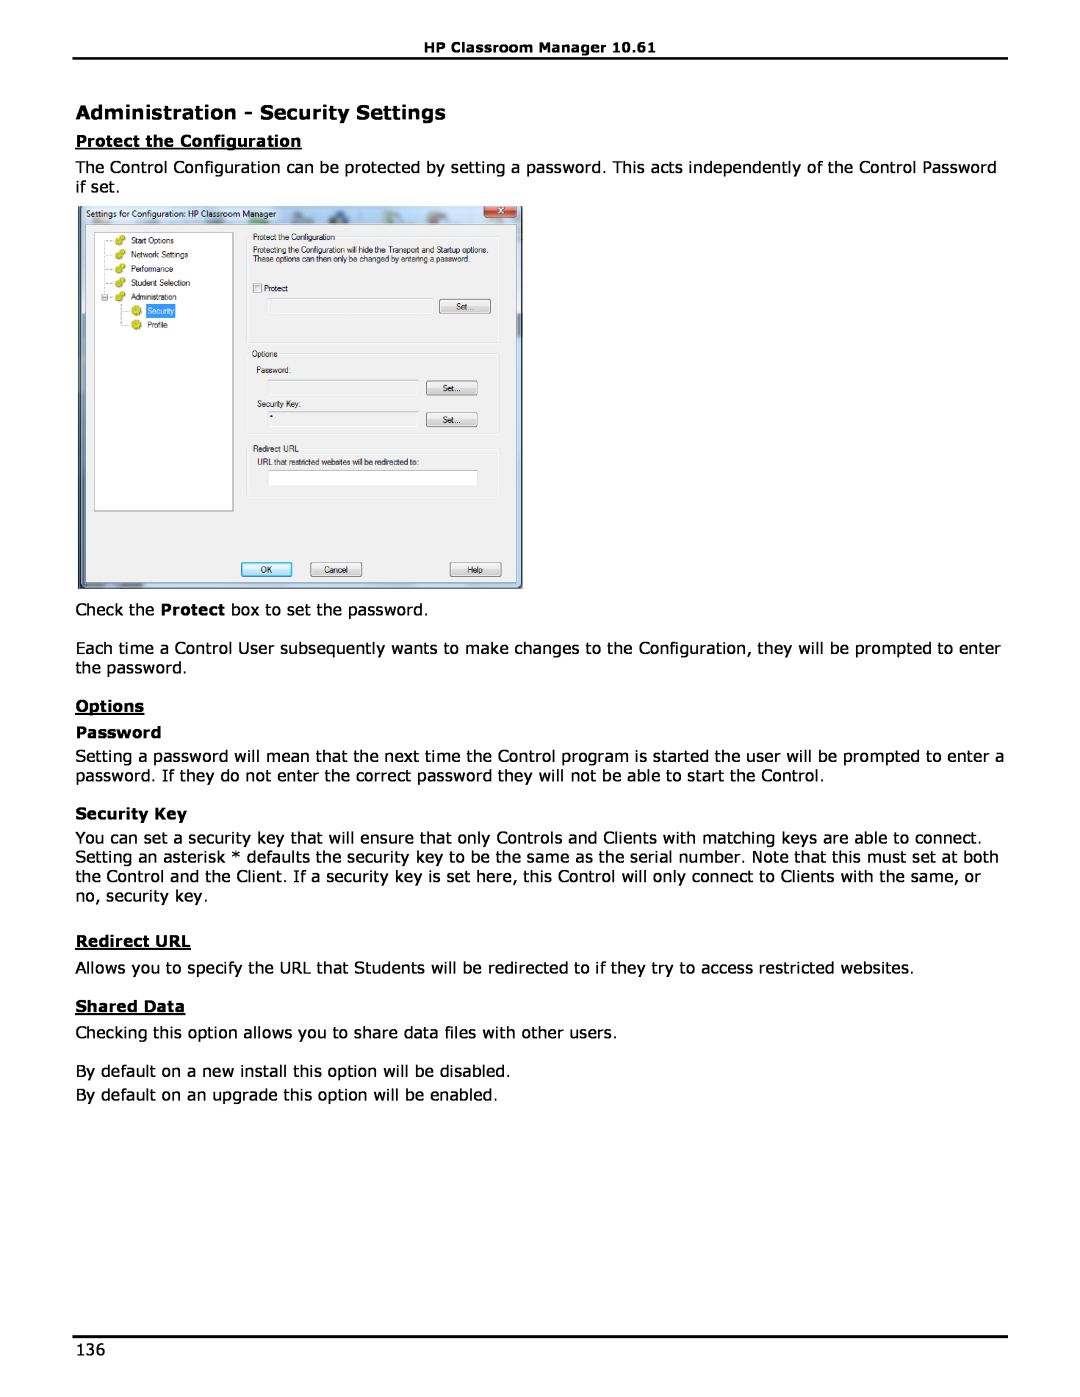 HP Classroom Manager manual Administration - Security Settings, Protect the Configuration, Options Password, Security Key 